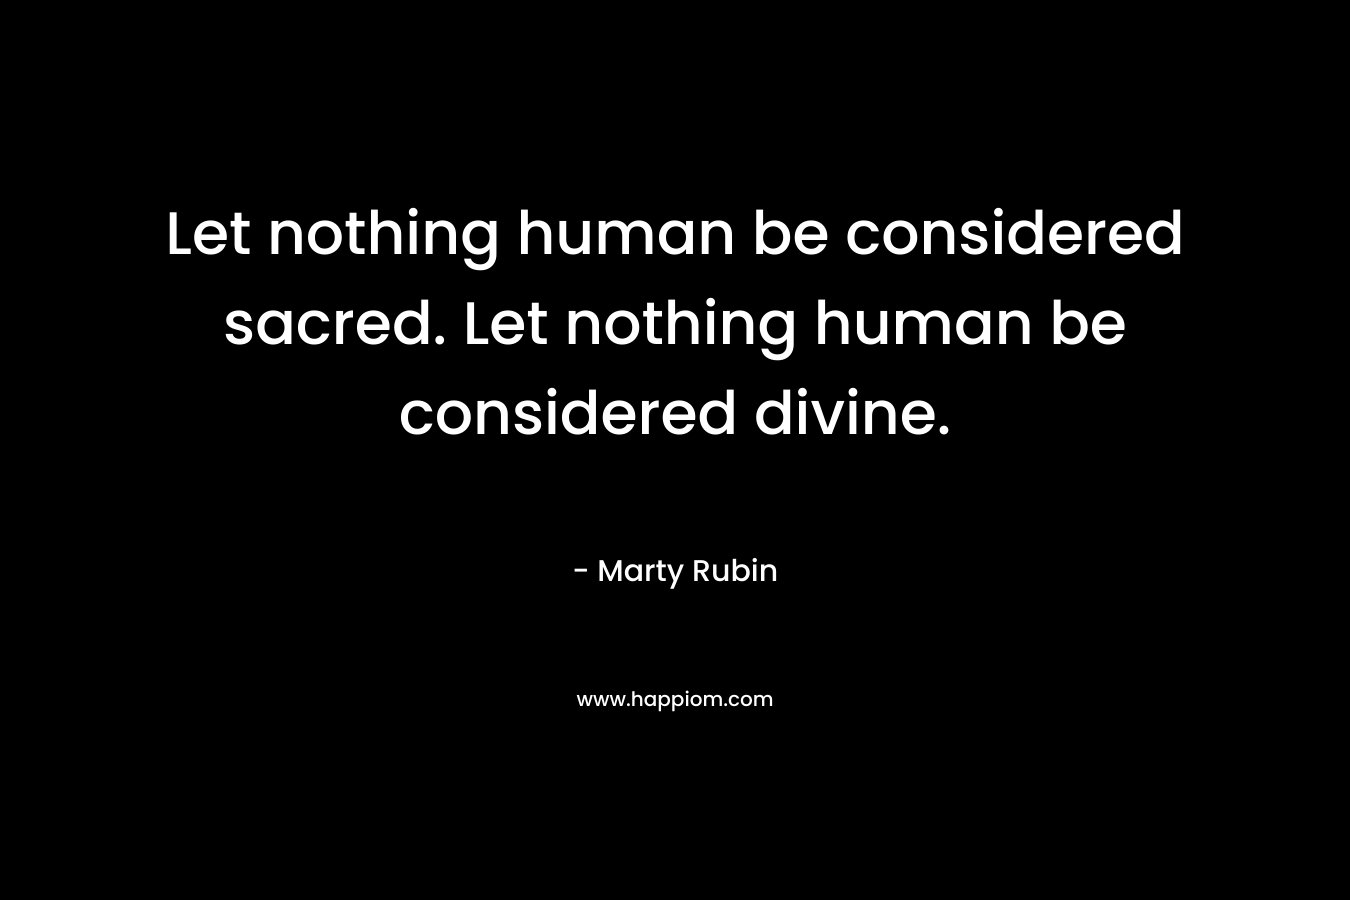 Let nothing human be considered sacred. Let nothing human be considered divine.